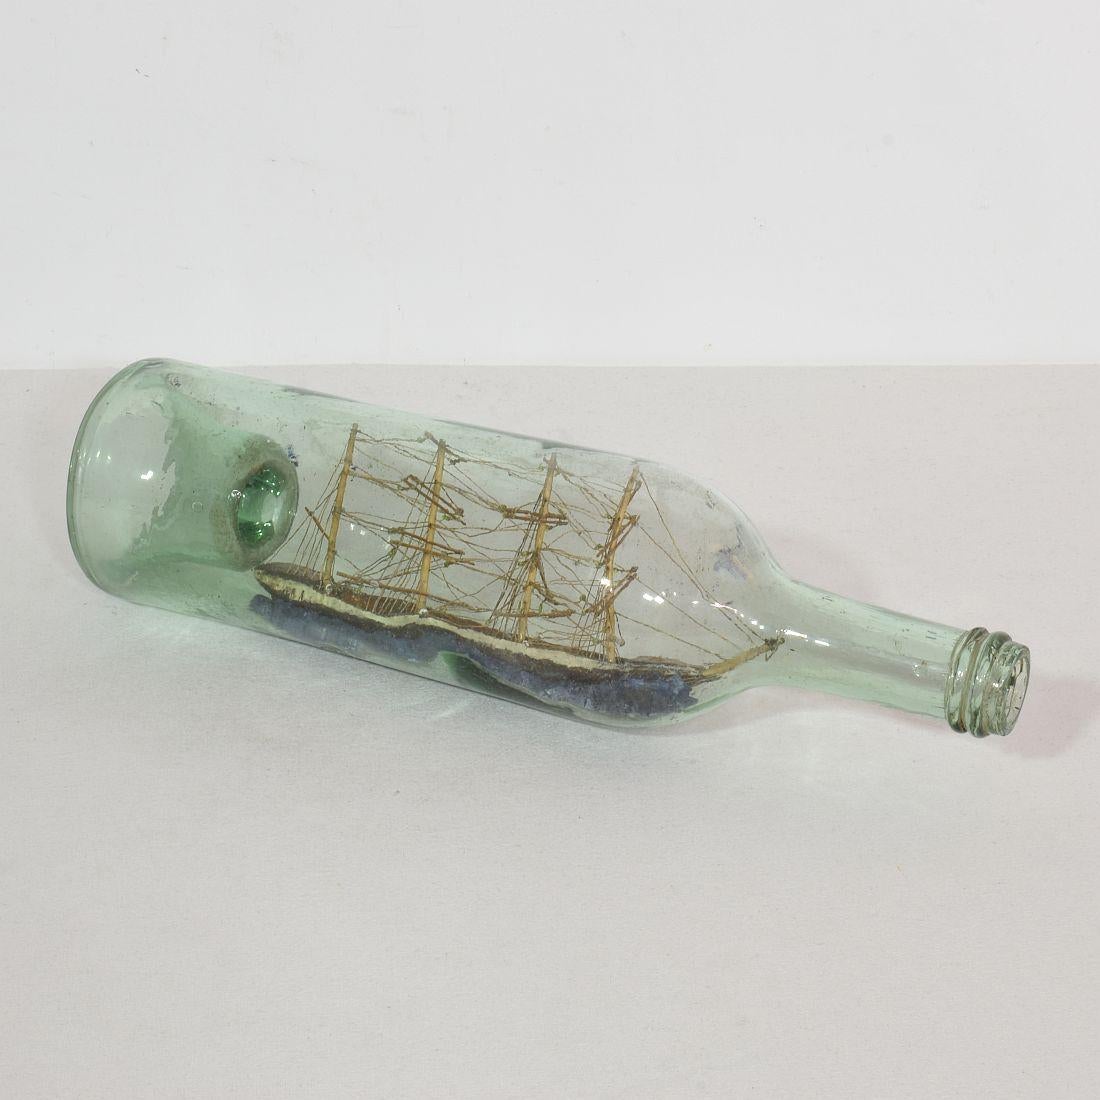 A very rare model ship within a bottle.
These most collectible pieces can be described as folk art and were often made at sea by sailors with spare time to fill when not working on deck.
France circa 1850. Weathered but good condition.